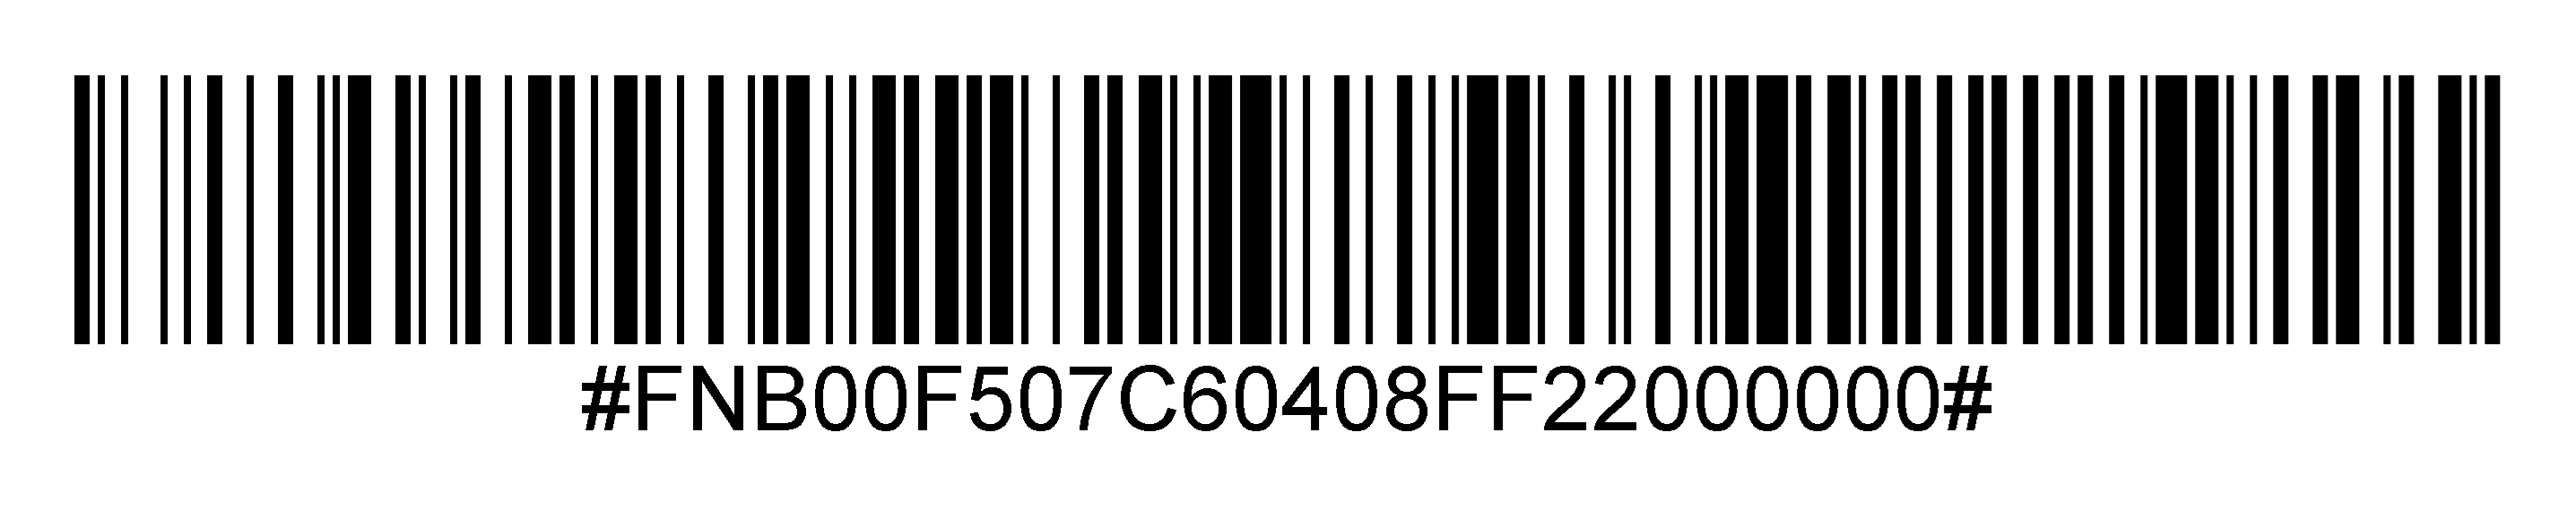 Remove a leading zero from UPC-A barcodes